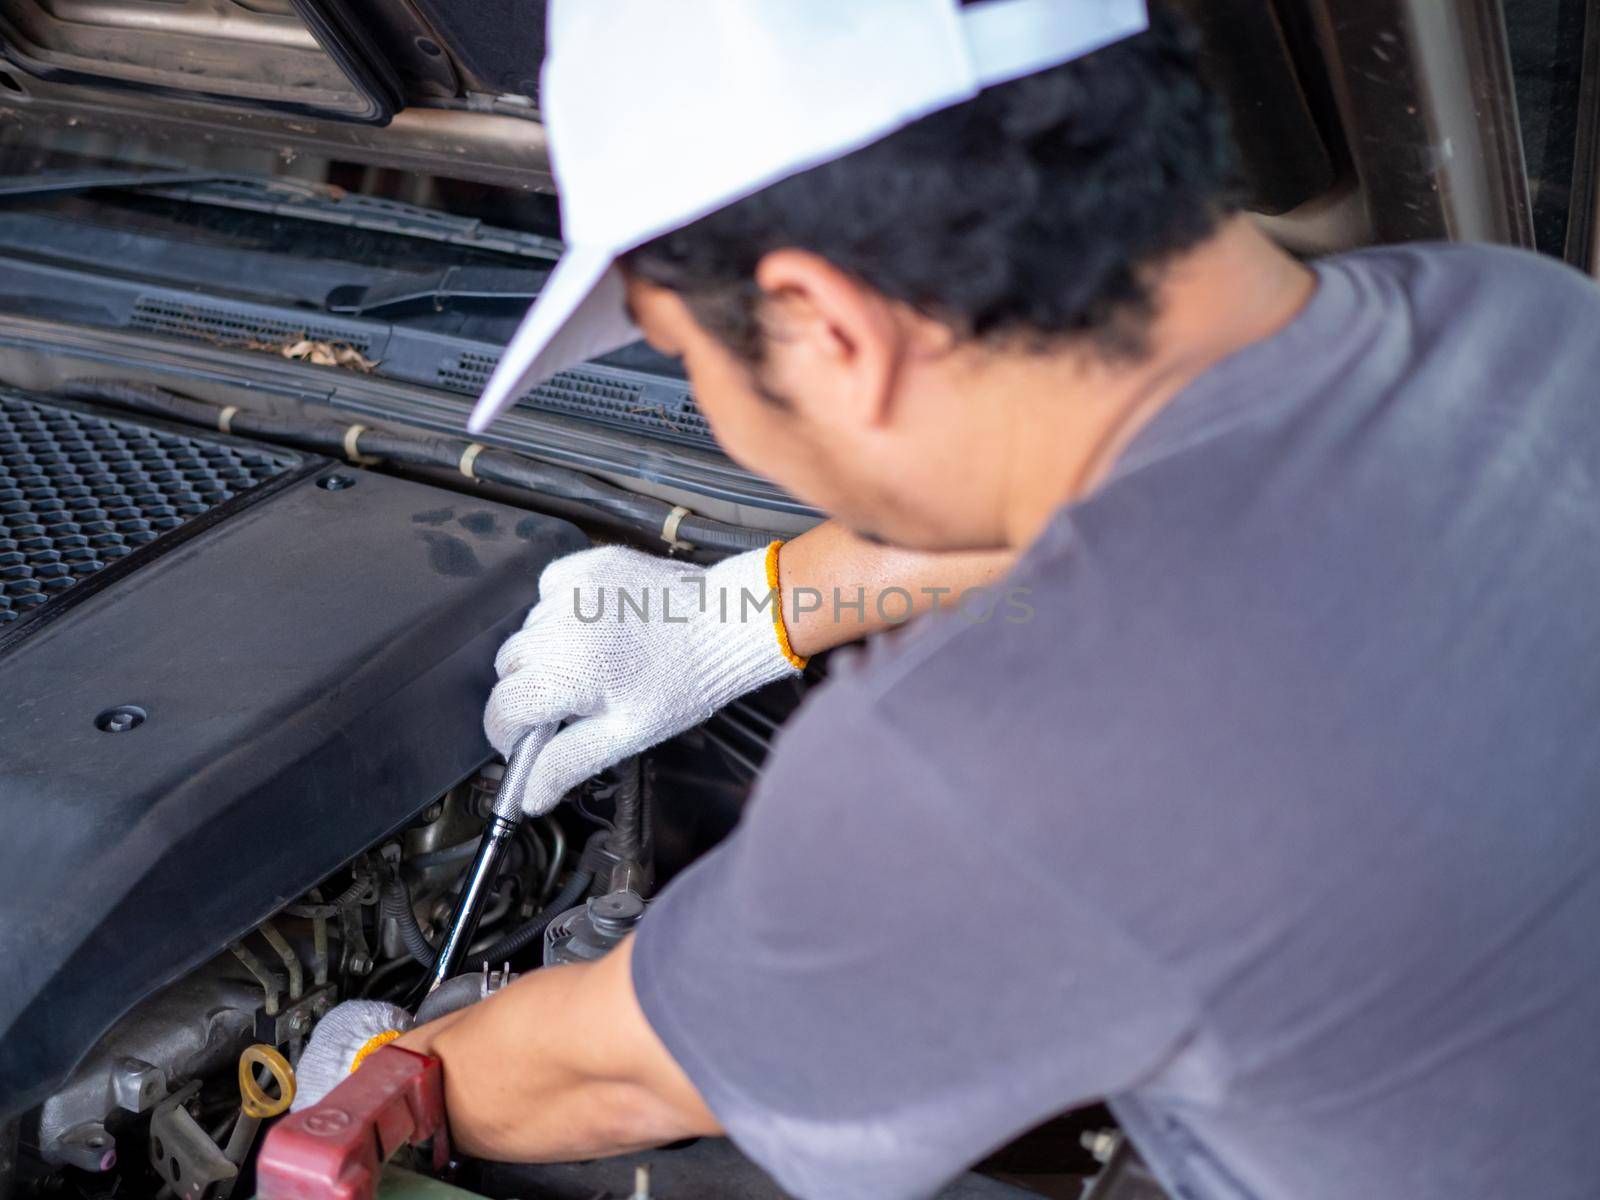 Mechanic holding a block wrench handle while fixing a car.